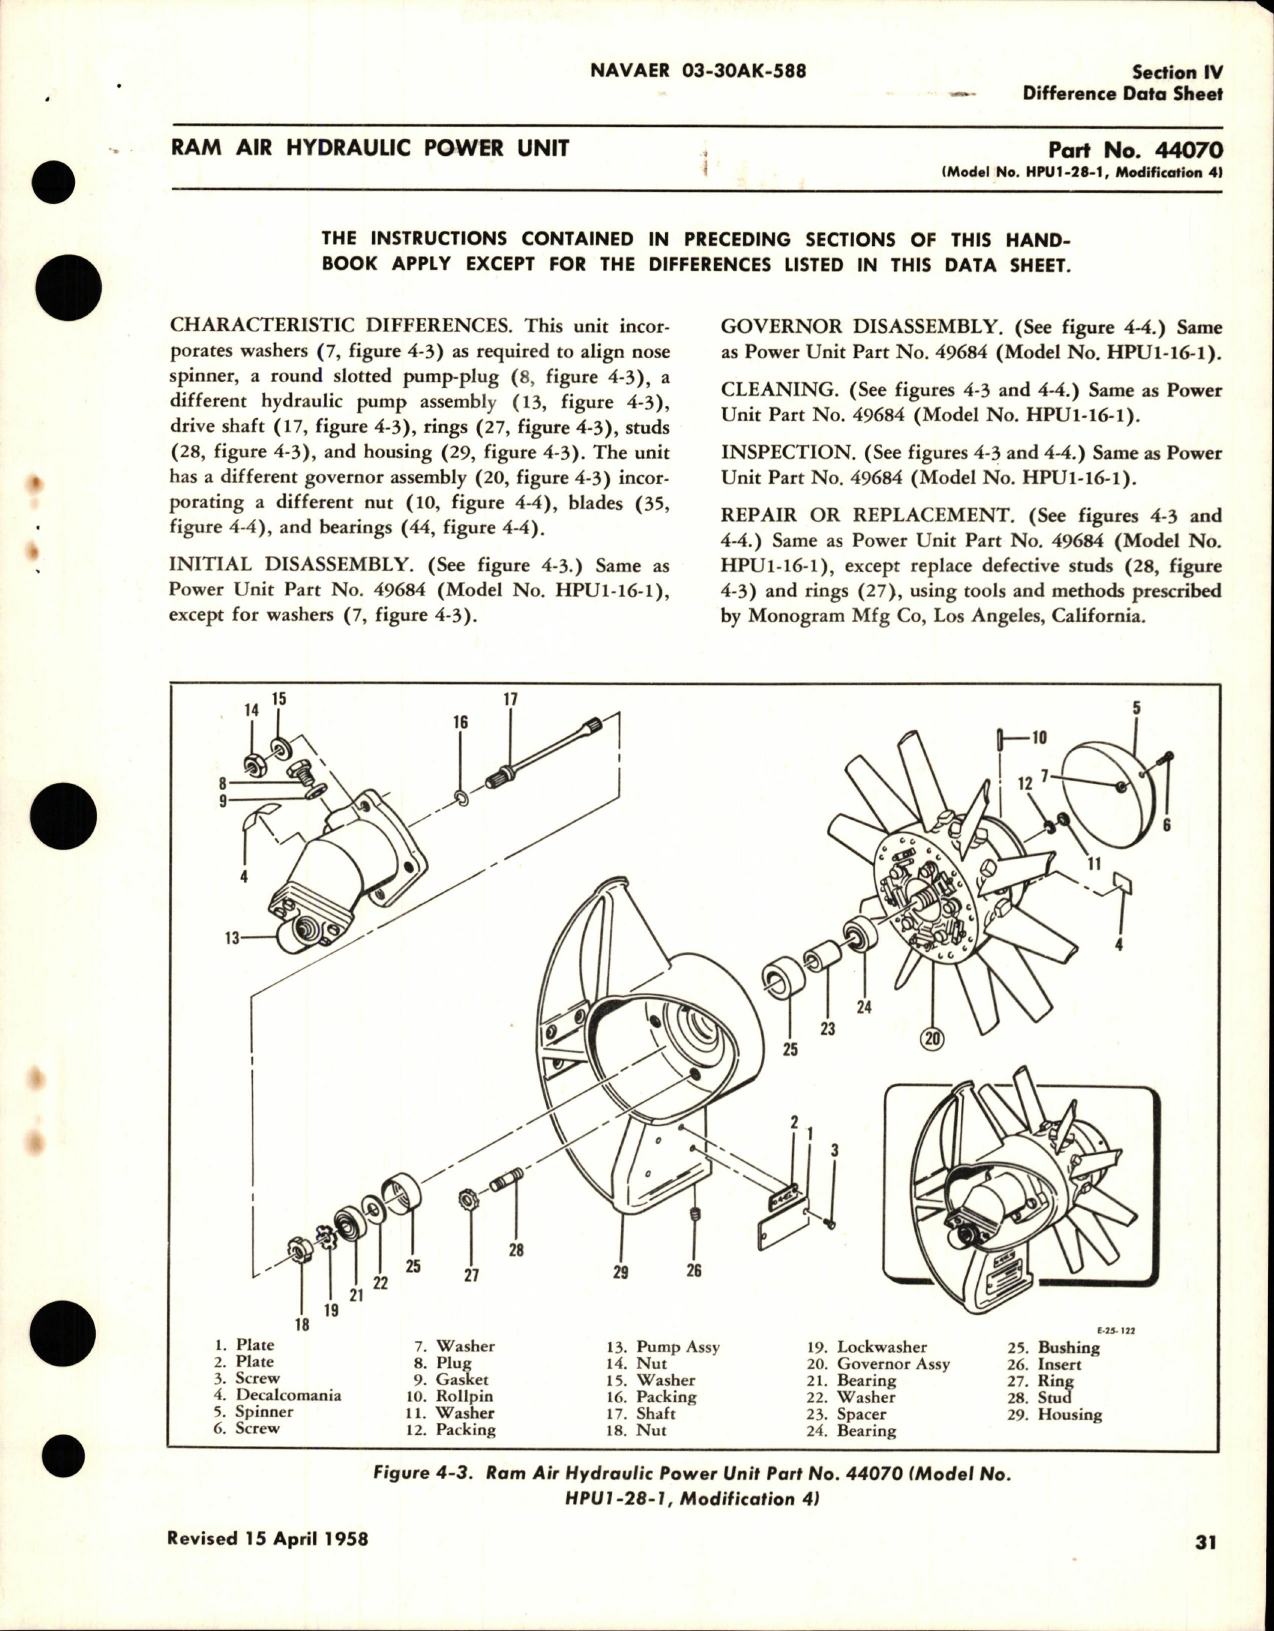 Sample page 5 from AirCorps Library document: Overhaul Instructions for Ram Air Hydraulic Power Unit - Part 44070 and 49684 - Models HPU1-28 and HPU1-16